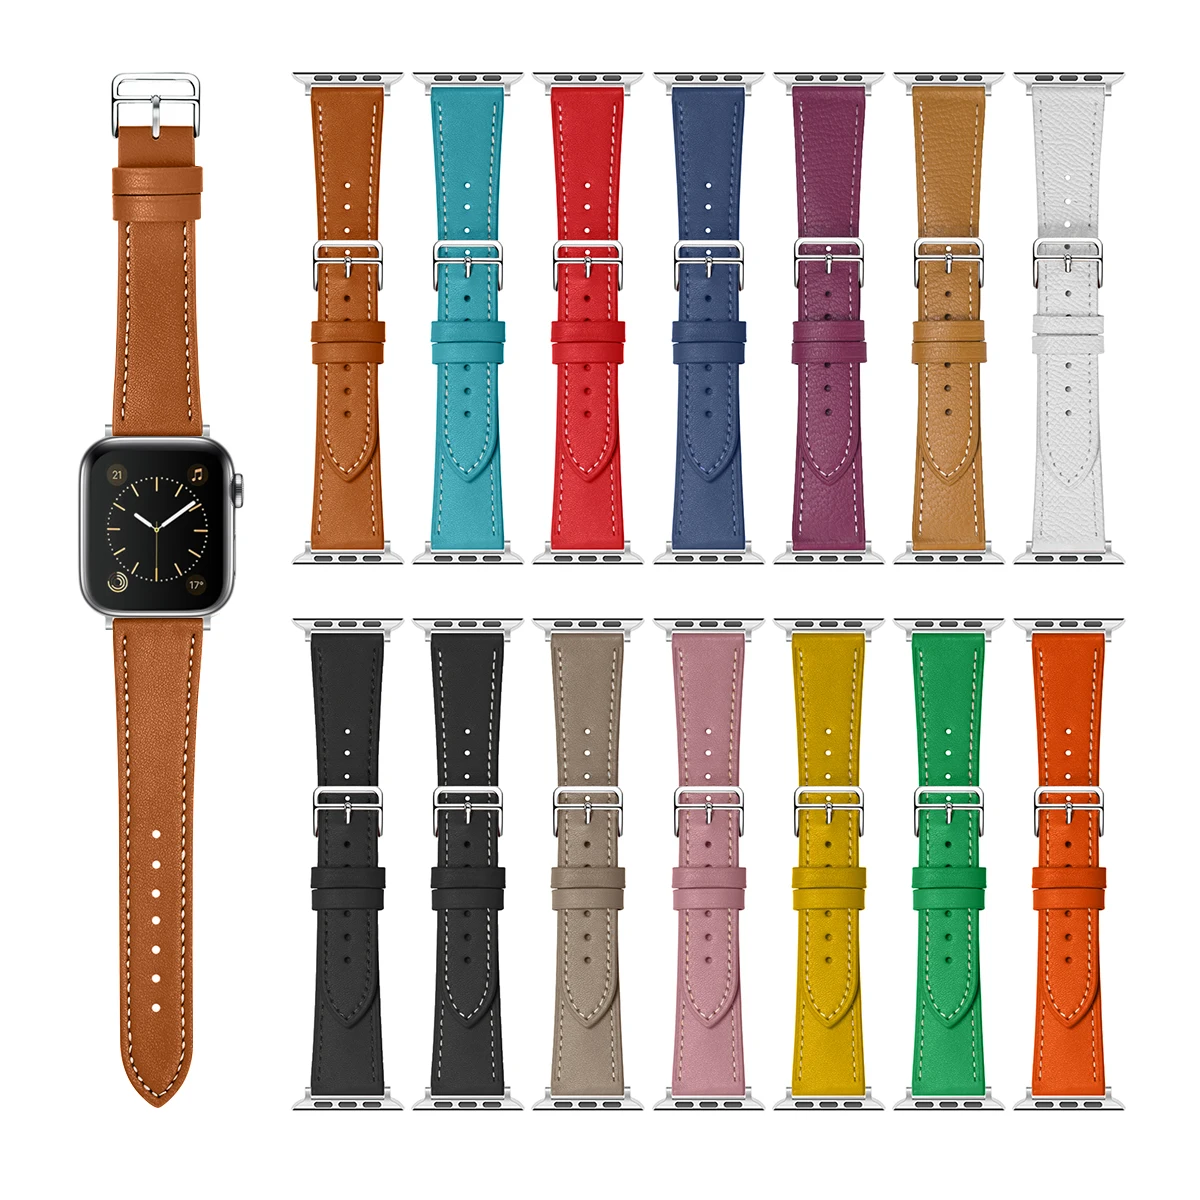 

Smart Single Tour Leather Watch Band Strap For Iwatch,Genuine Leather Band 38mm 40mm 42mm 44mm For Apple Watch 6 Se 5